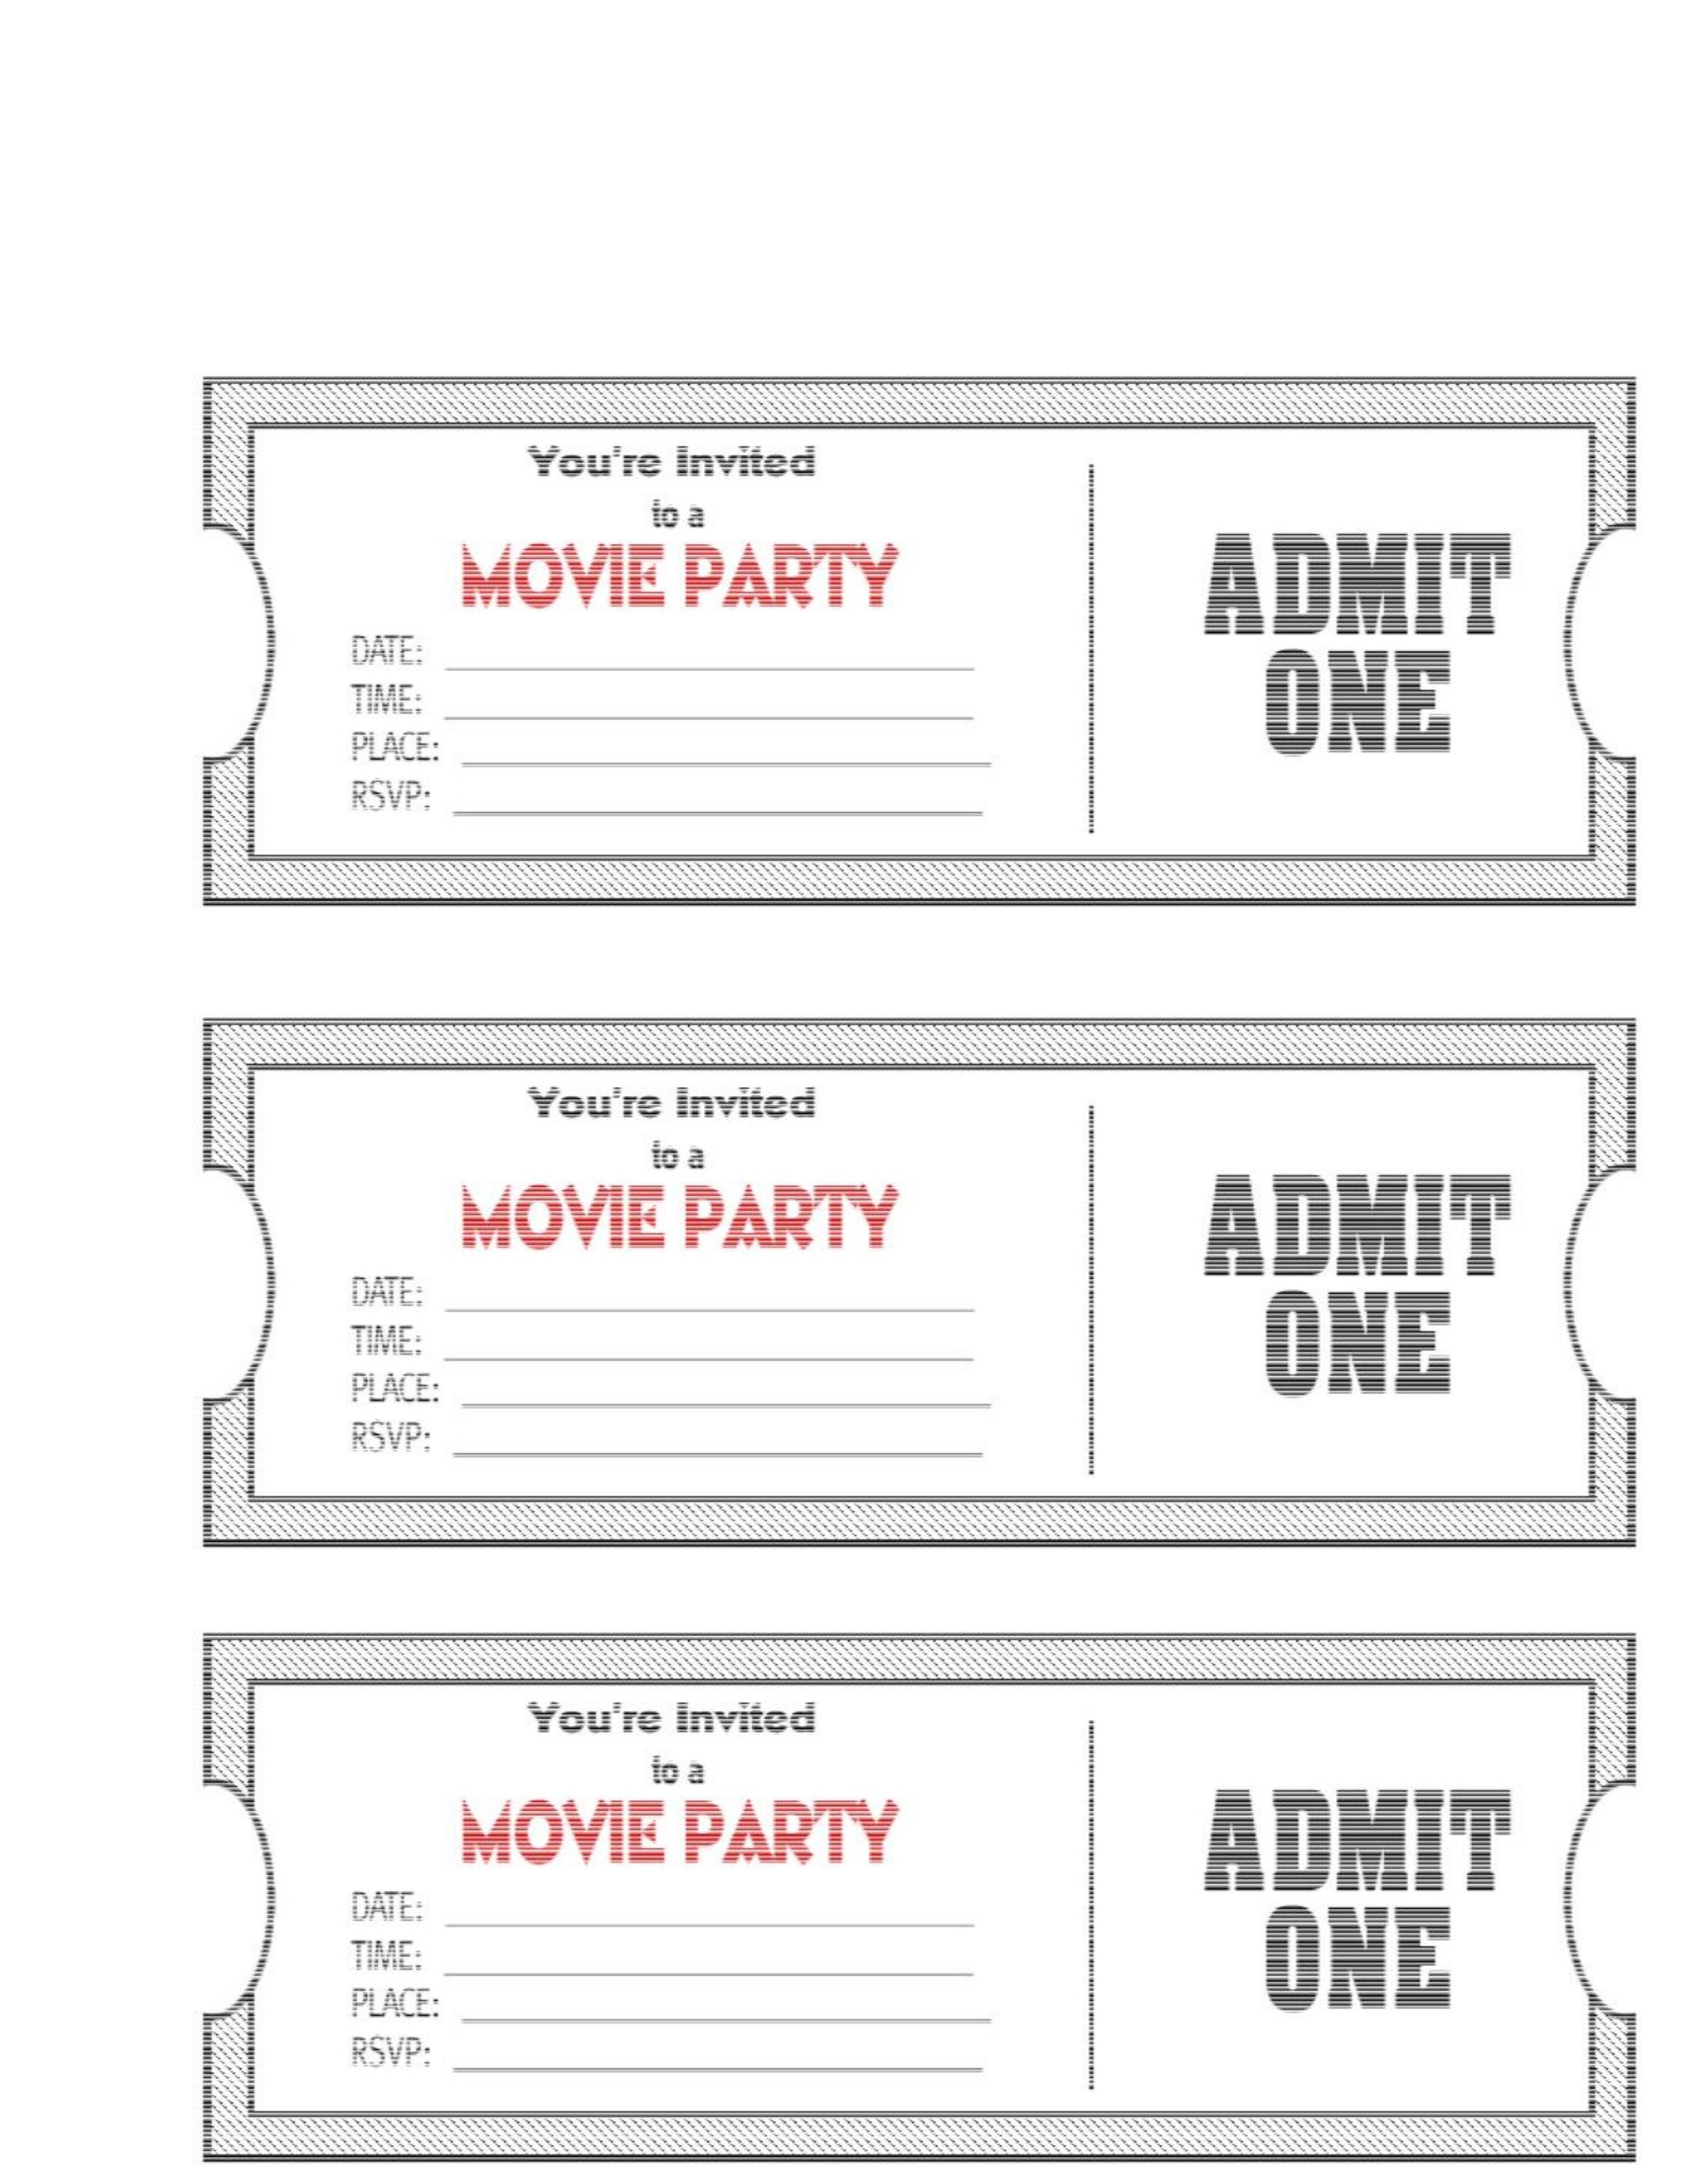 Template Raffle Tickets Free Download Template Raffle Tickets Free - Free Printable Raffle Ticket Template Download